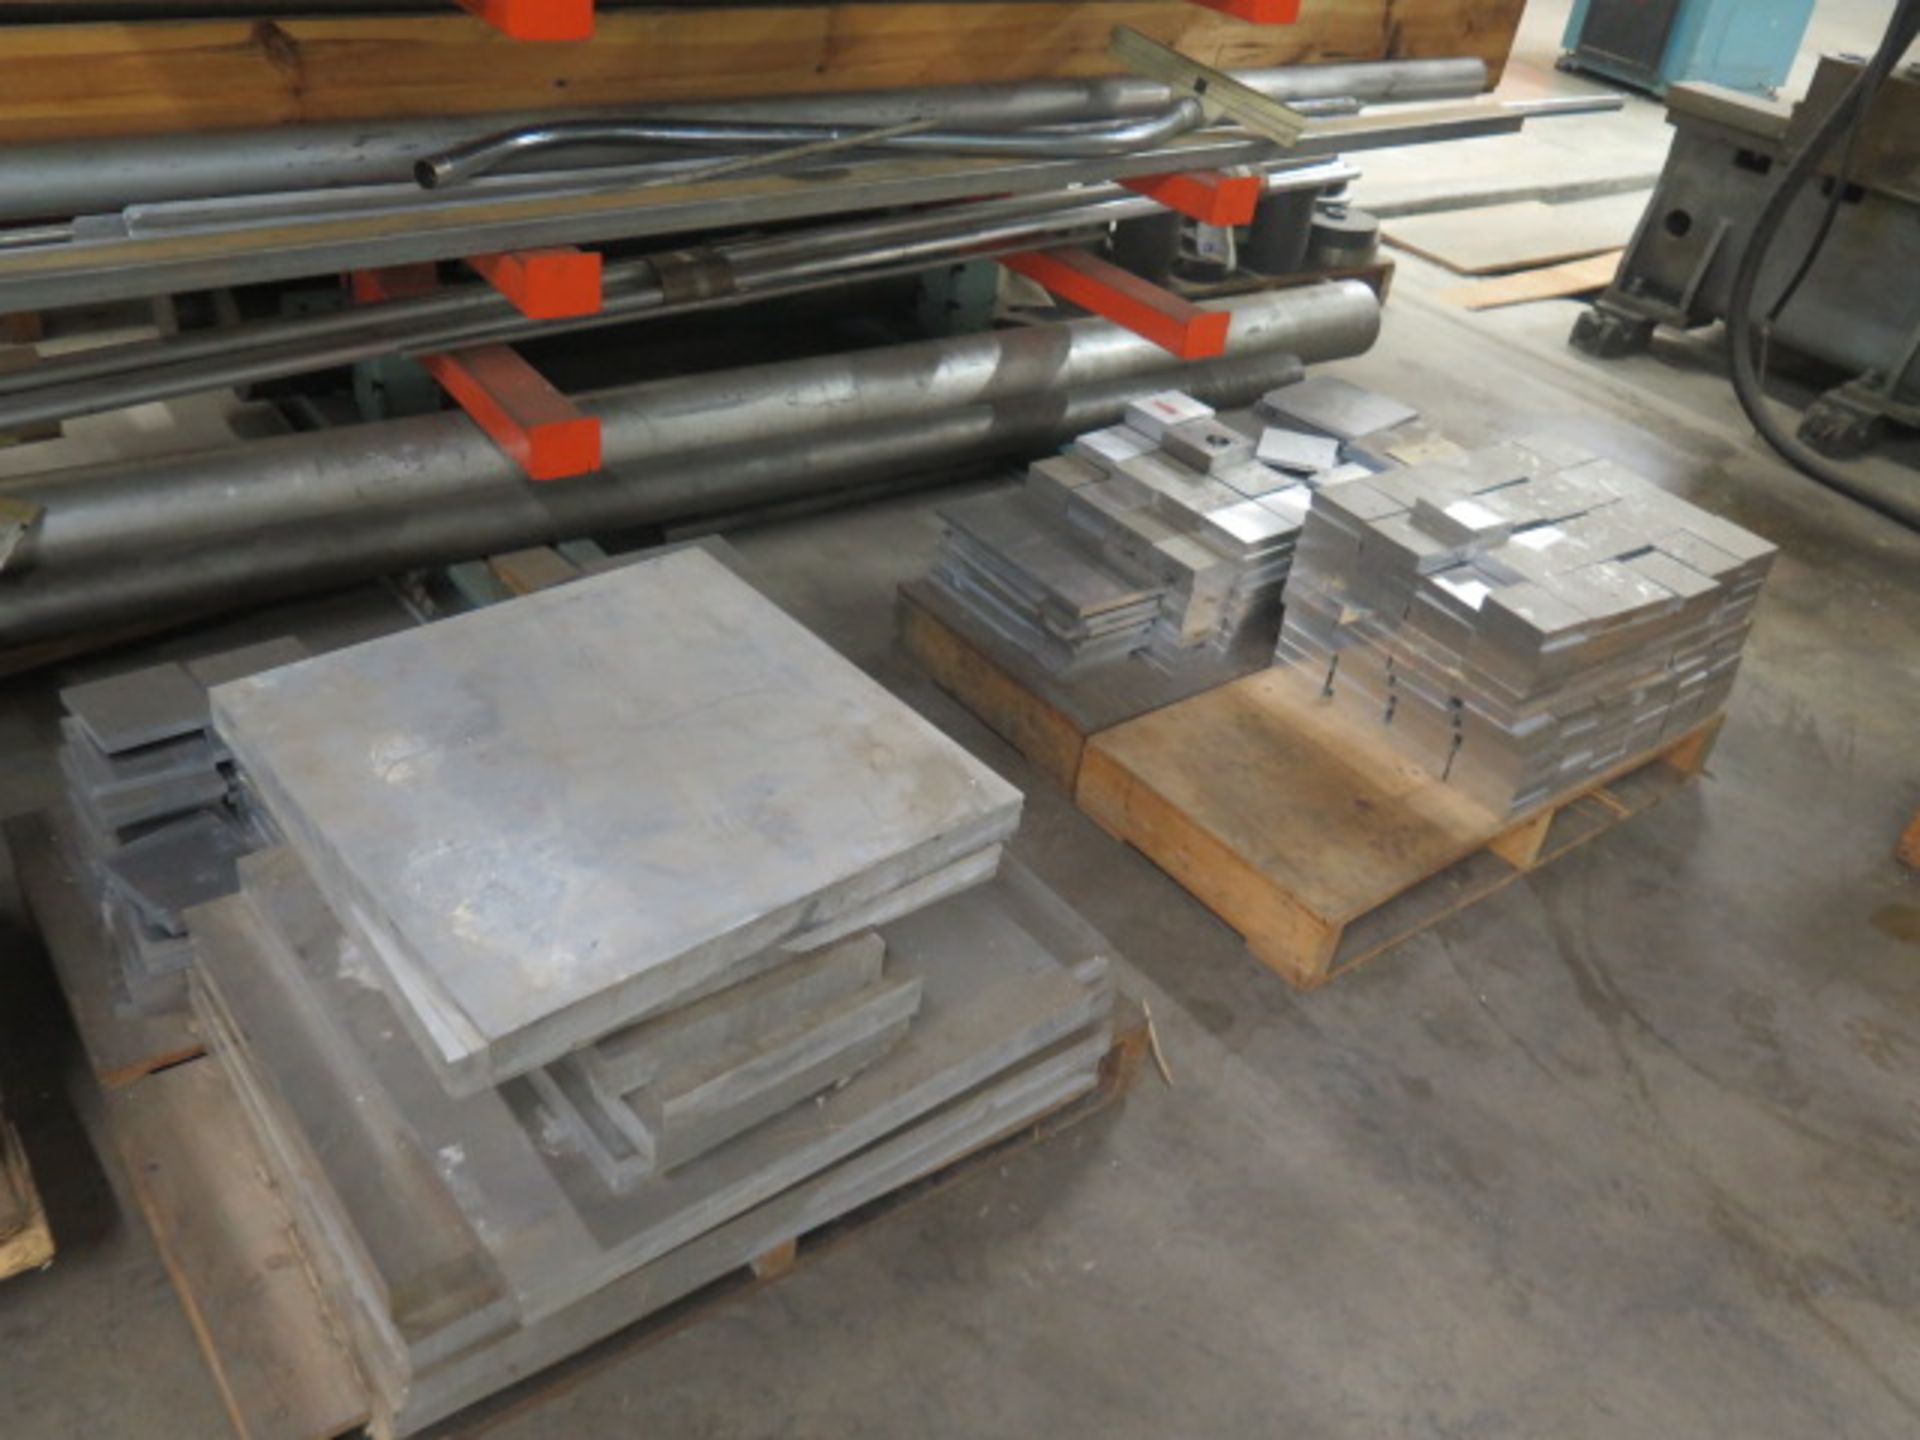 Aluminum Bar Stock, Stainless and Cres Bar Stock, Aluminum Plate and Extruded Blanks - Image 6 of 8